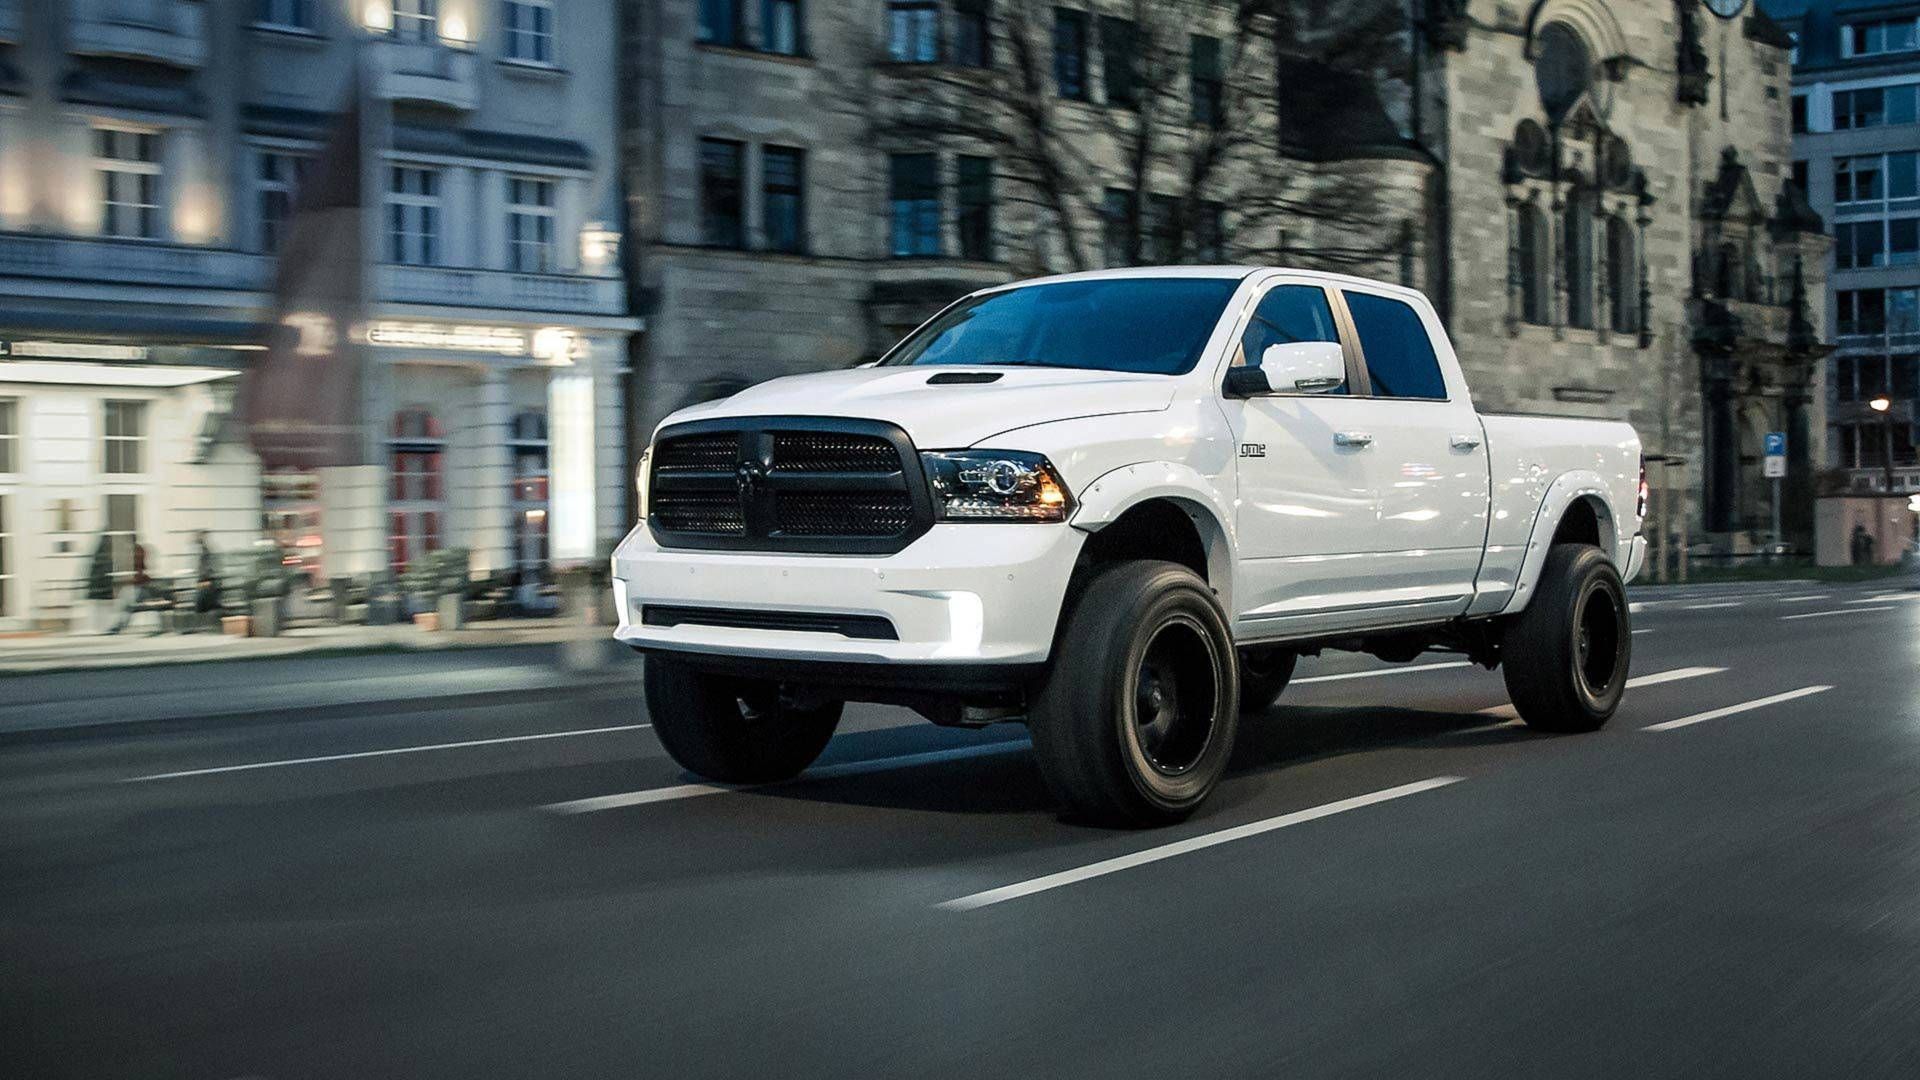 2019 Ram 1500 Off-Road Edition by GME